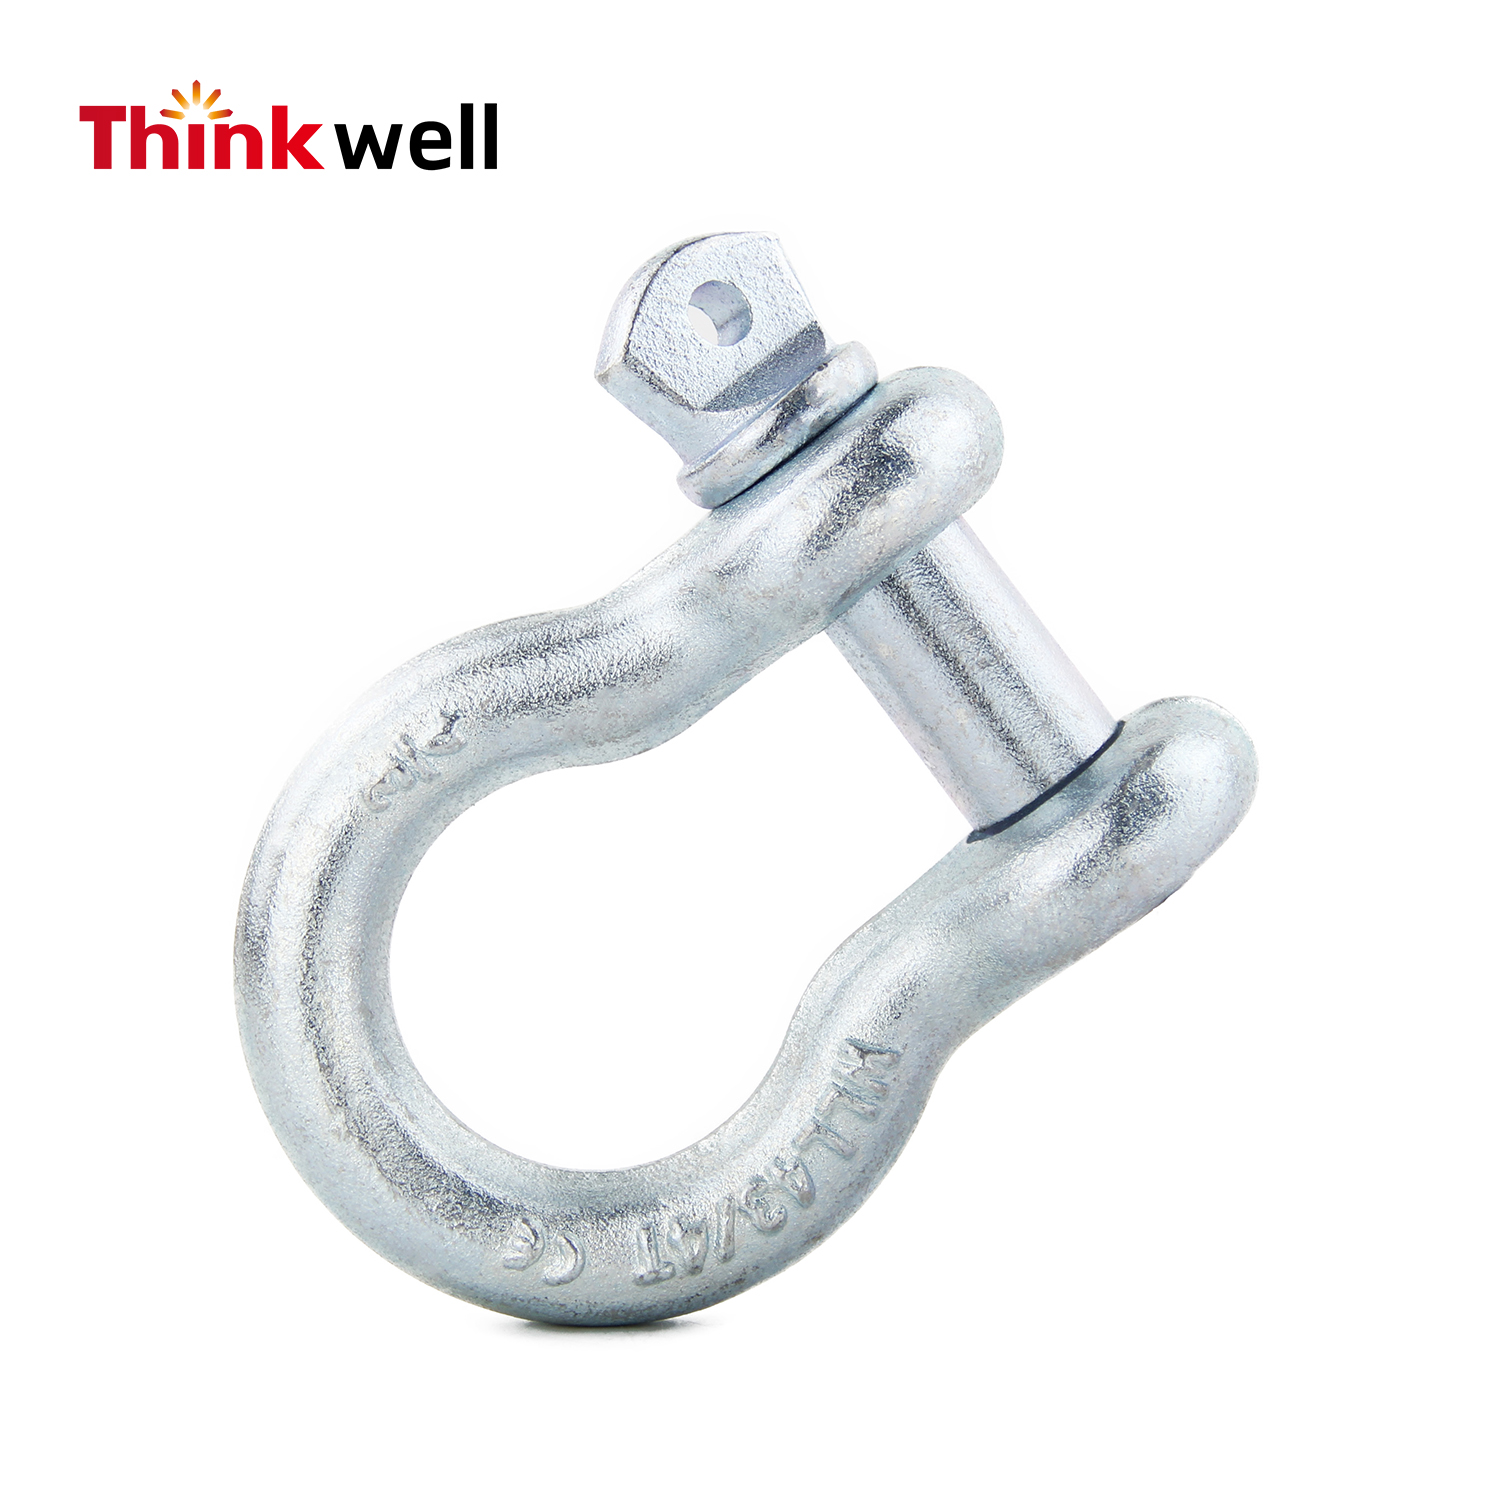 Thinkwell Forged US Type G209A Alloy Steel Screw Pin Anchor Shackle 